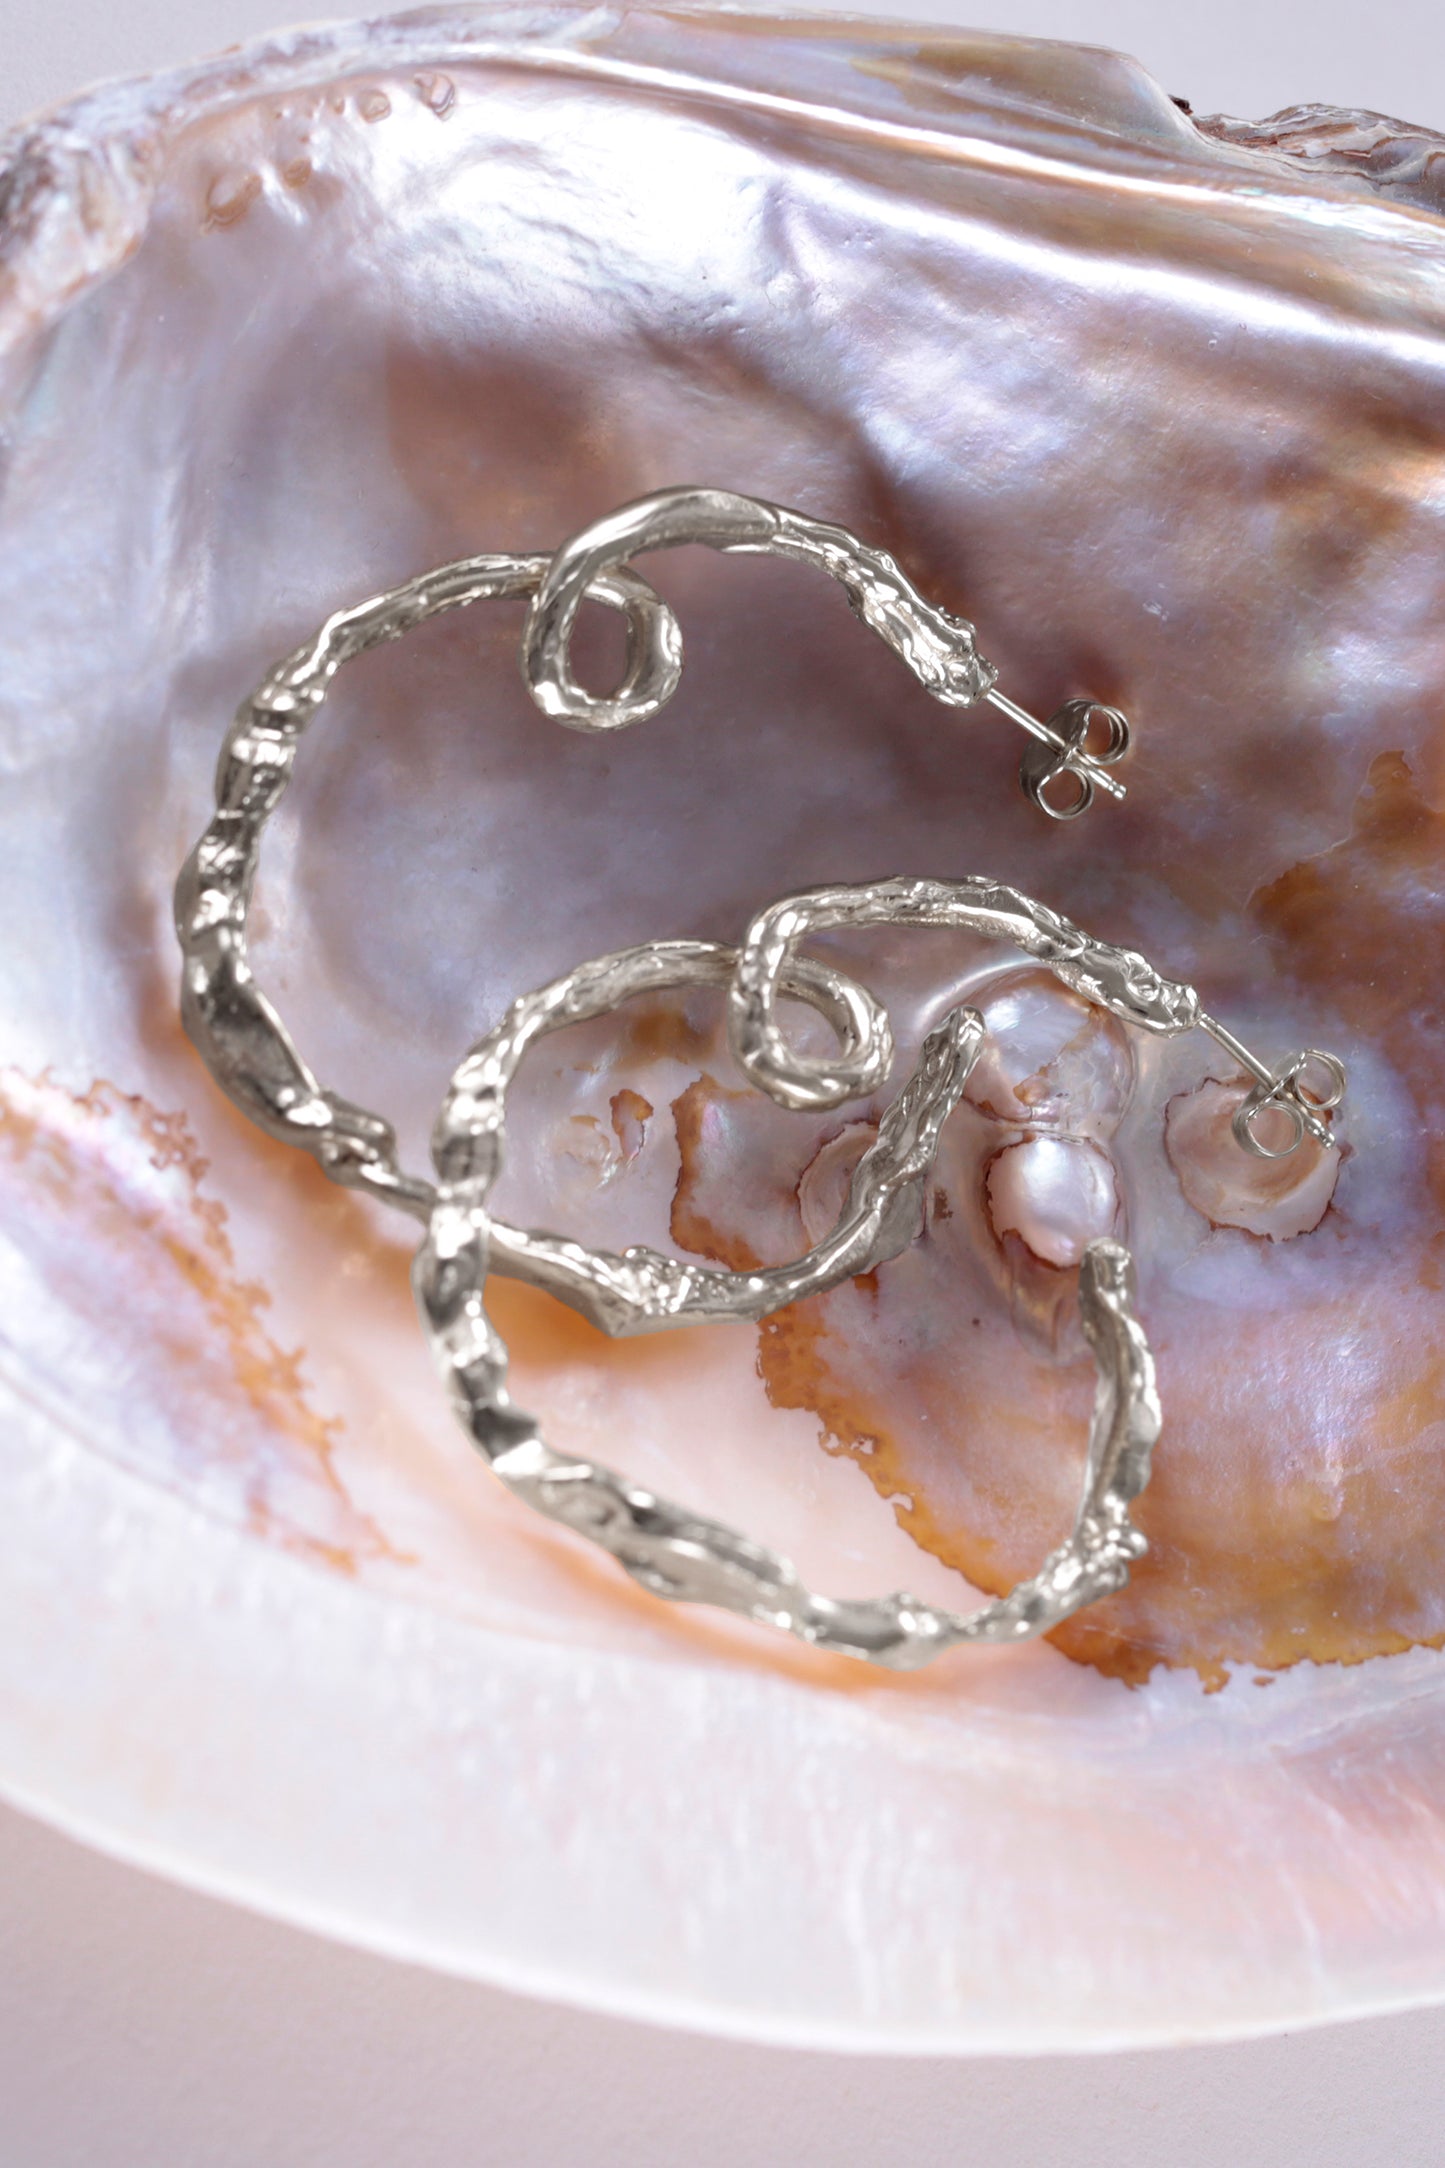 Pair of Sterling Silver CLARK Medusa Curl Hoops earrings nested in a seashell. These sculptural hoops reference a ringlet of hair from the Greek Medusa myth. 